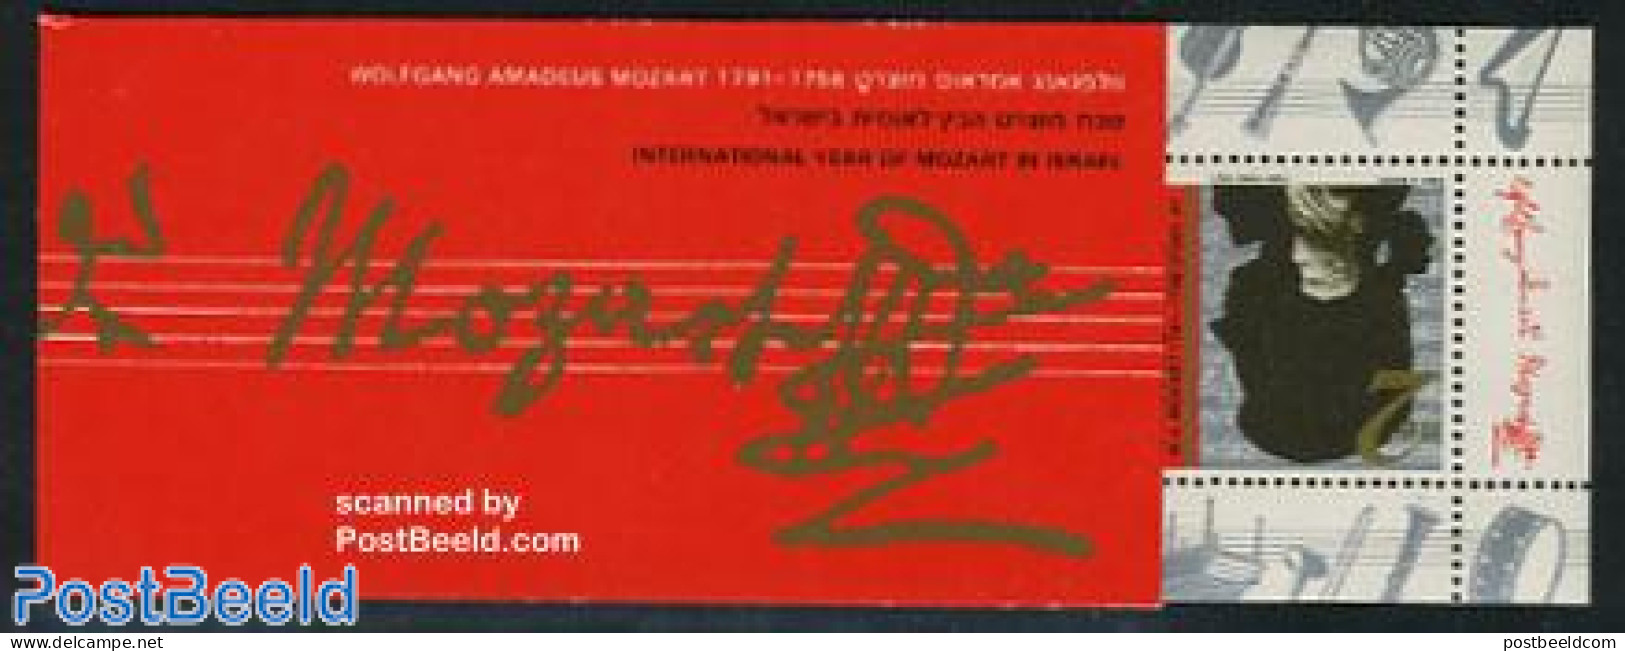 Israel 1991 Mozart Year Booklet, Mint NH, Performance Art - Amadeus Mozart - Music - Stamp Booklets - Unused Stamps (with Tabs)